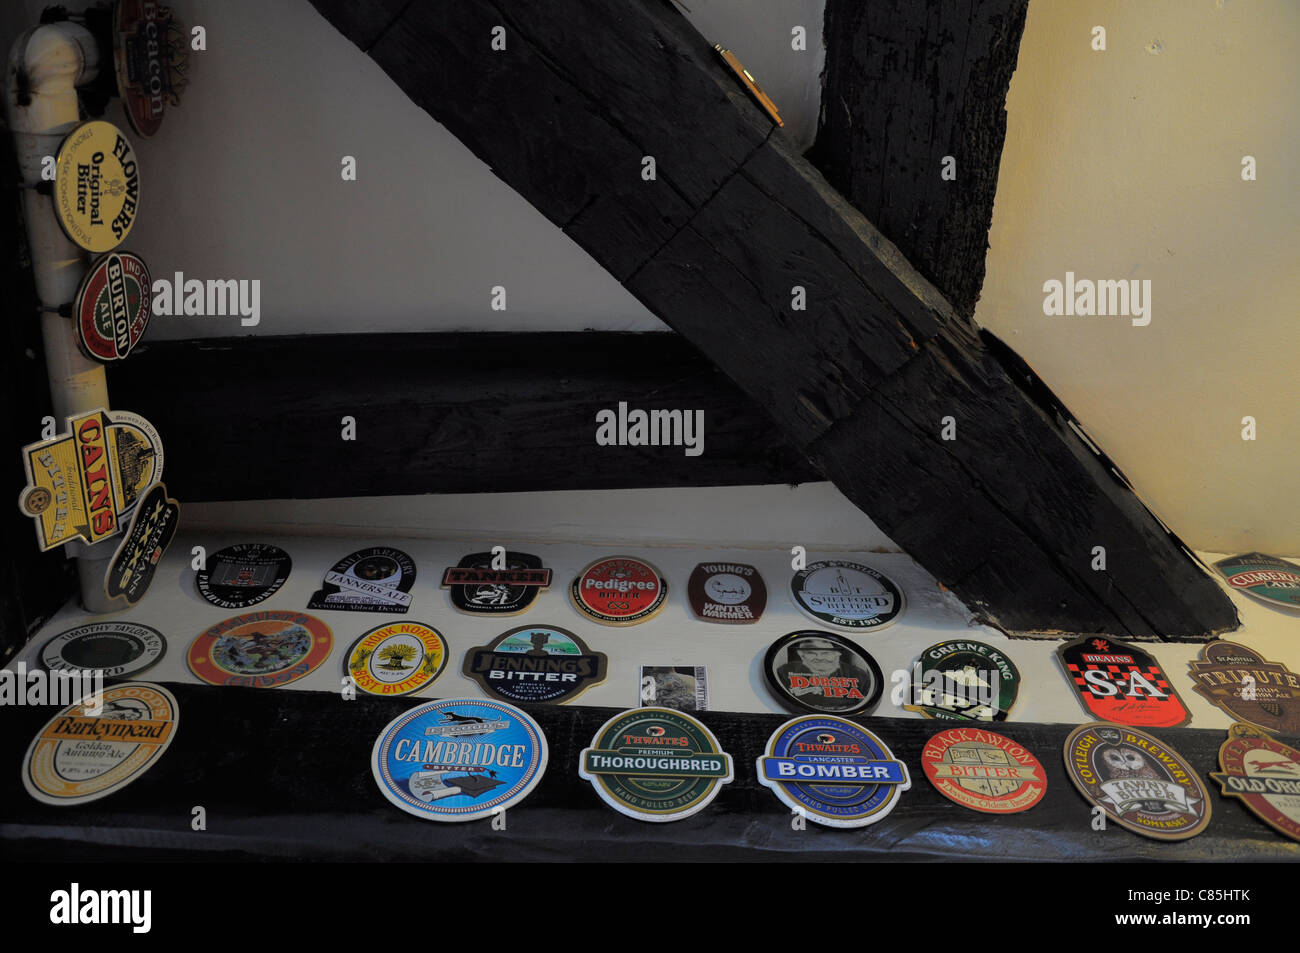 Pub interior of The Cherub Inn in Dartmouth showing traditional beer mats displayed on the wall. Stock Photo